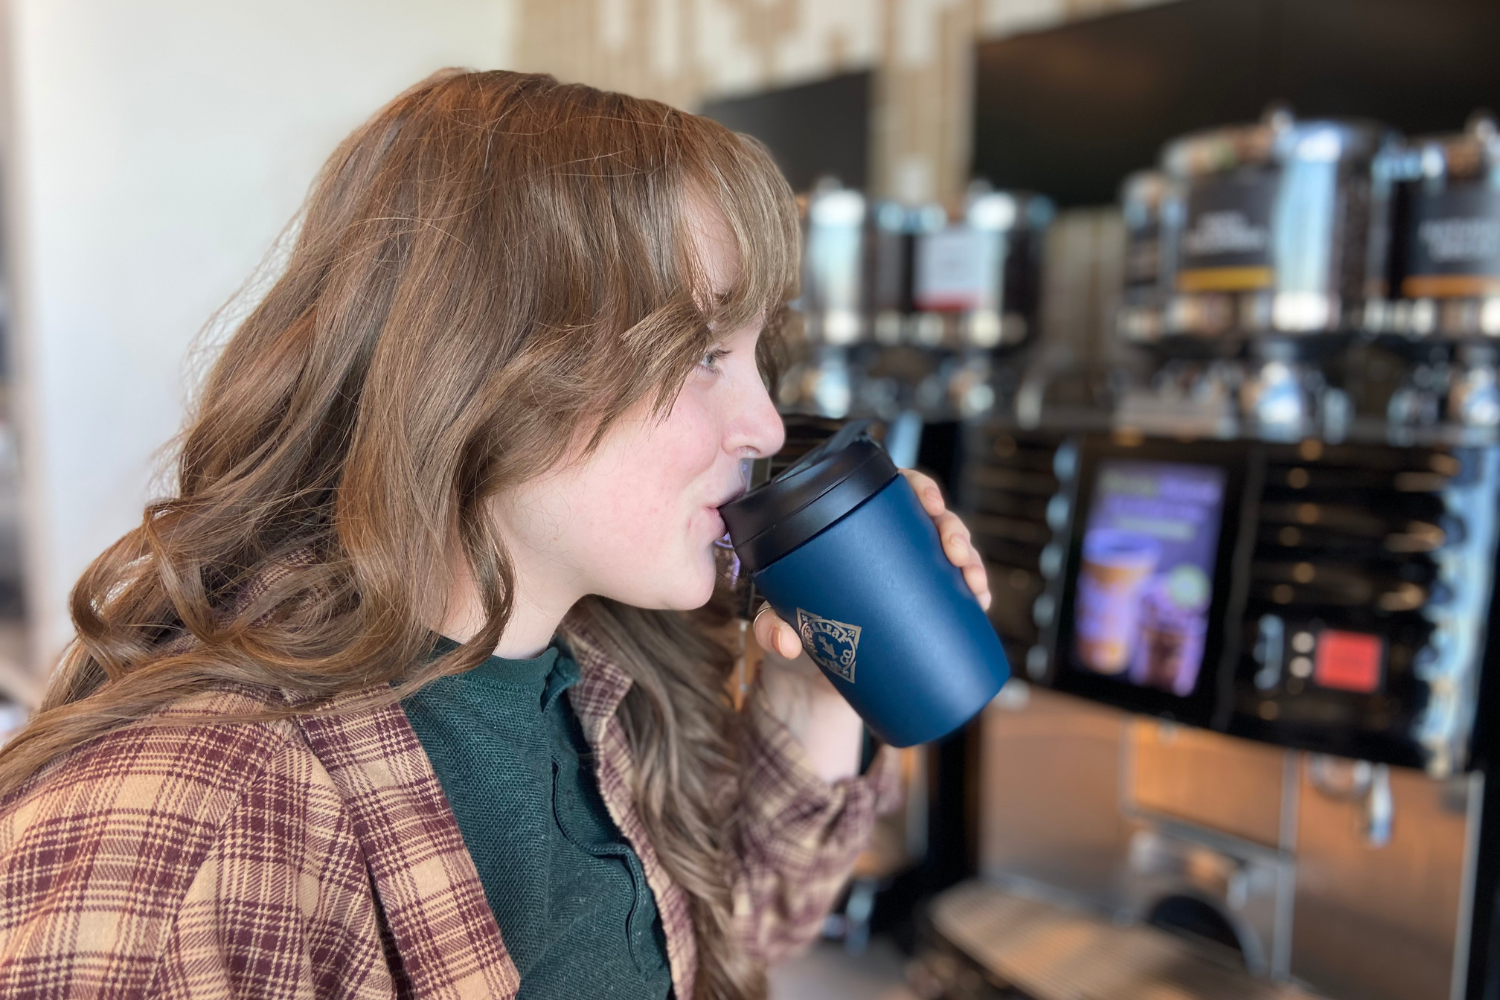 A girl drinking out of an insulated travel mug inside a gas station